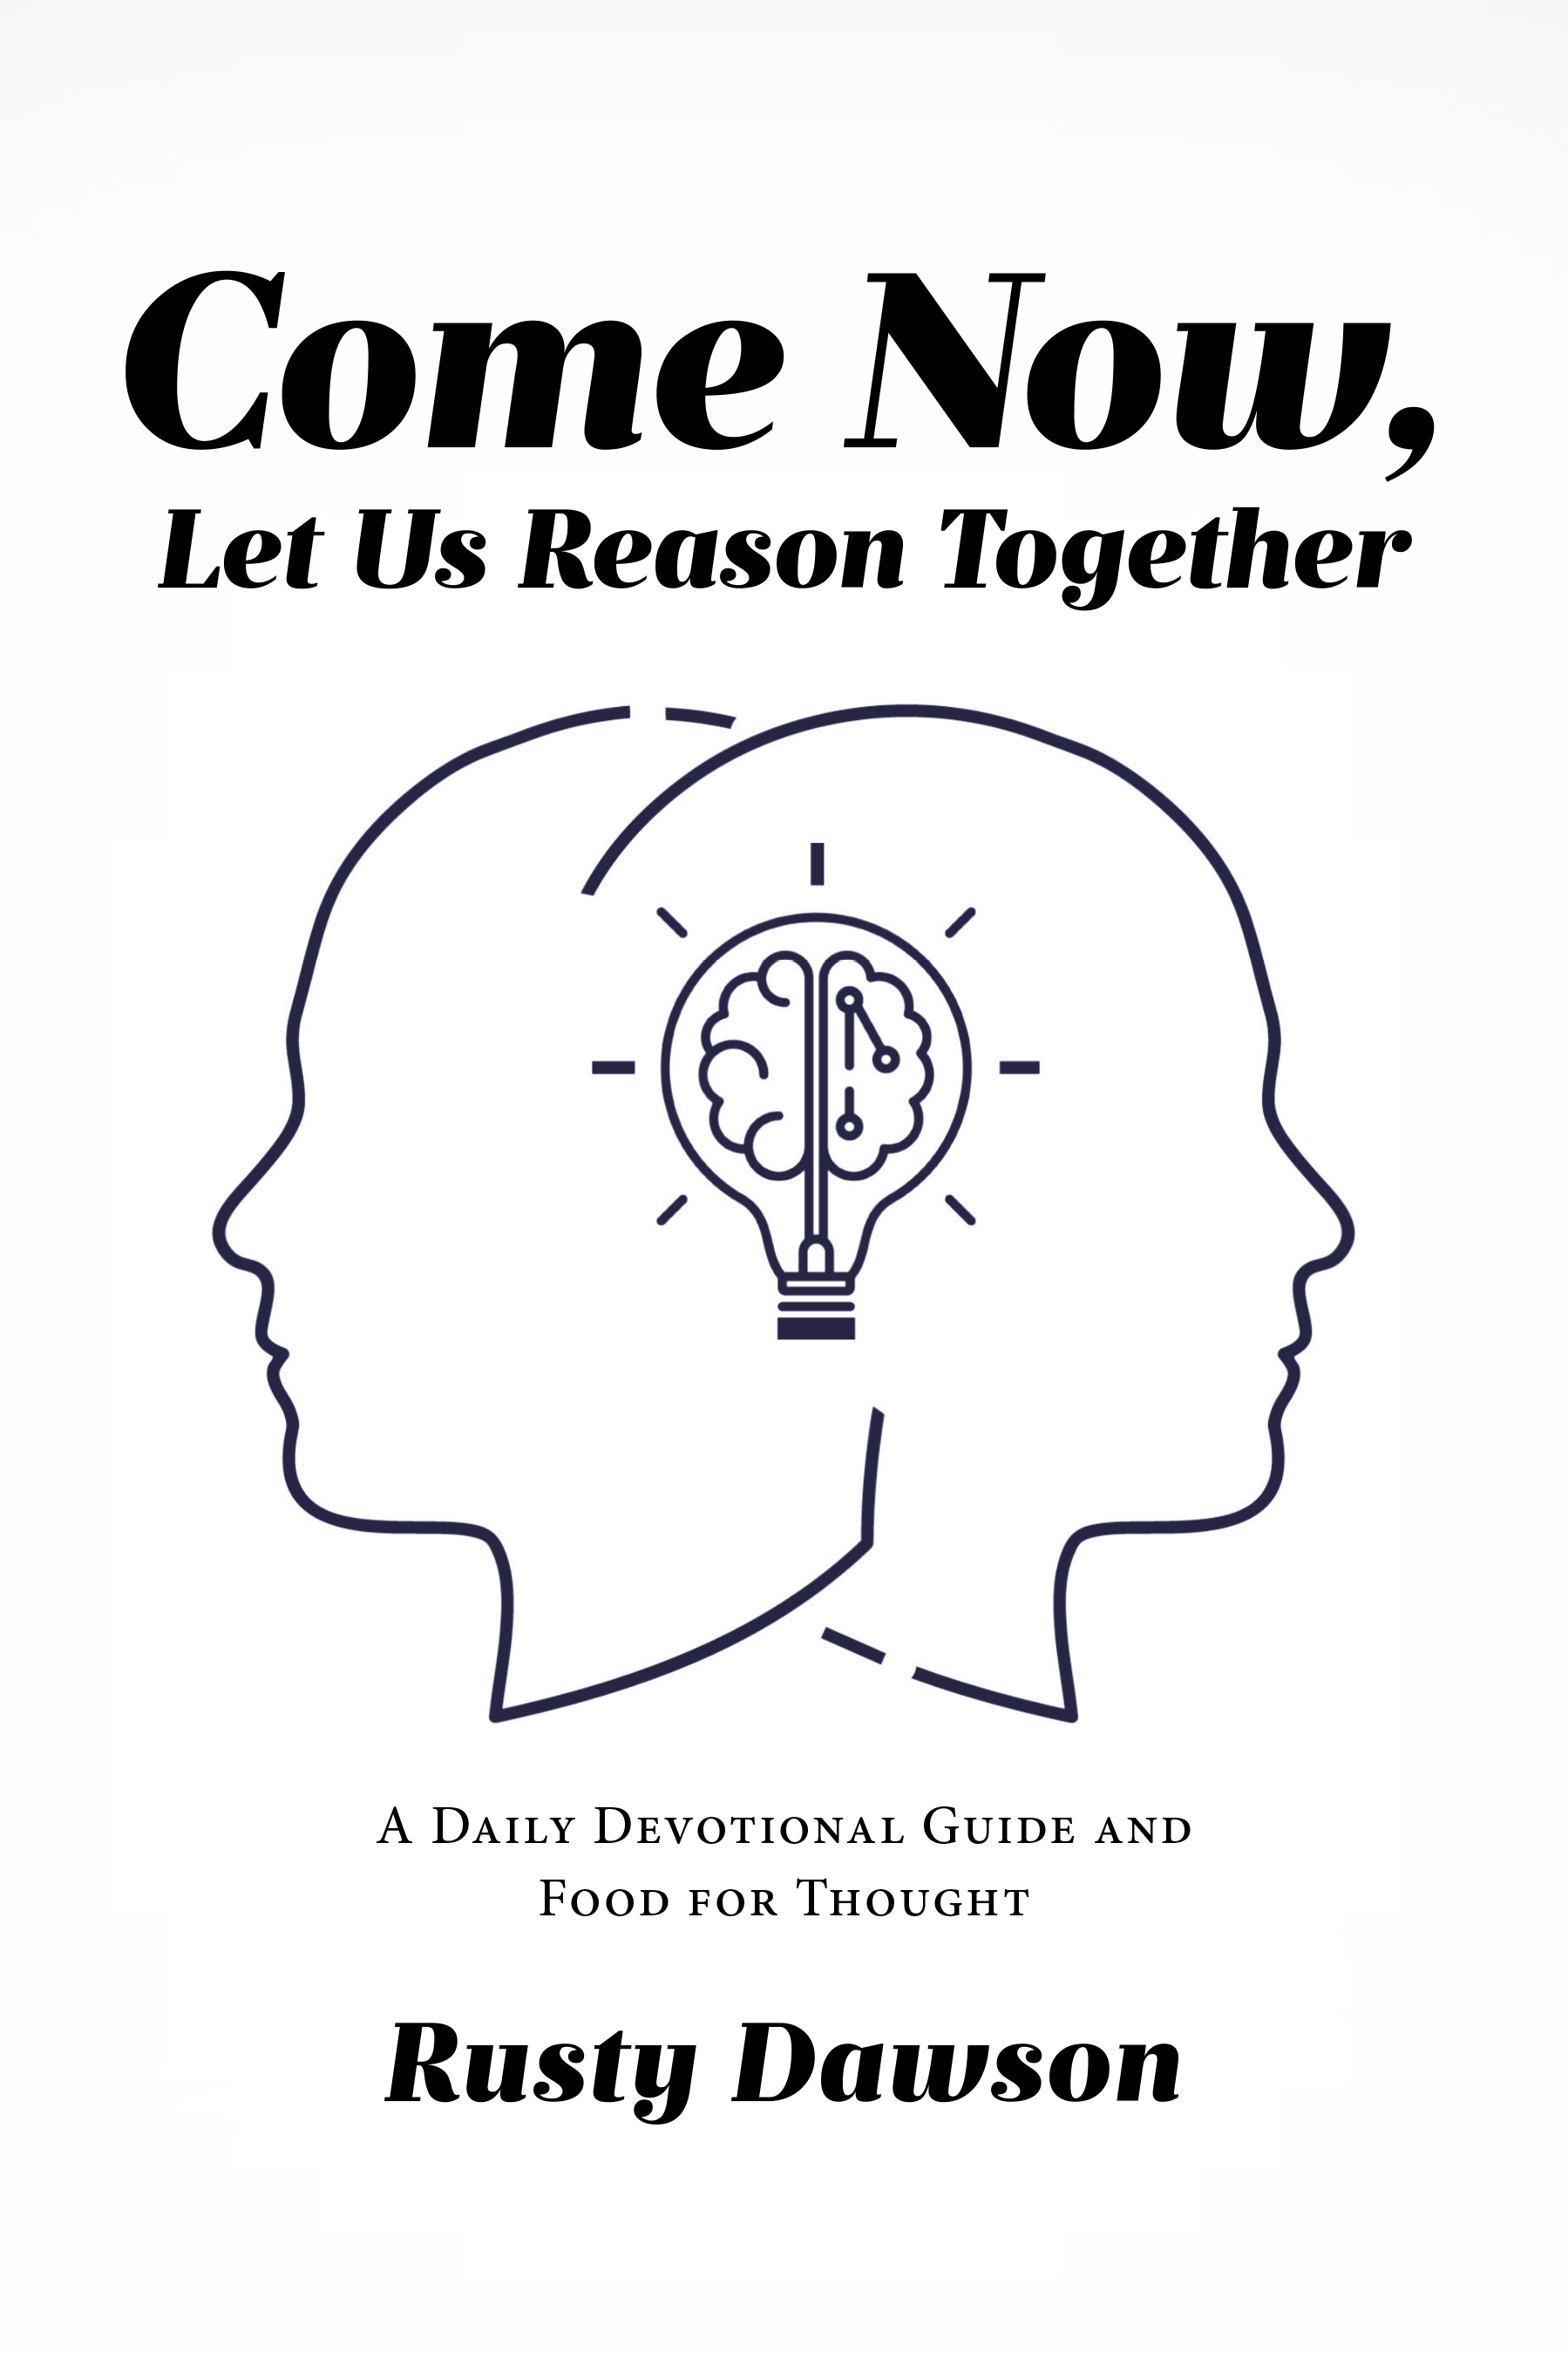 Author Rusty Dawson’s New Book, "Come Now, Let Us Reason Together," is a Series of Daily Devotionals Designed to Help Readers Along Their Journey with God